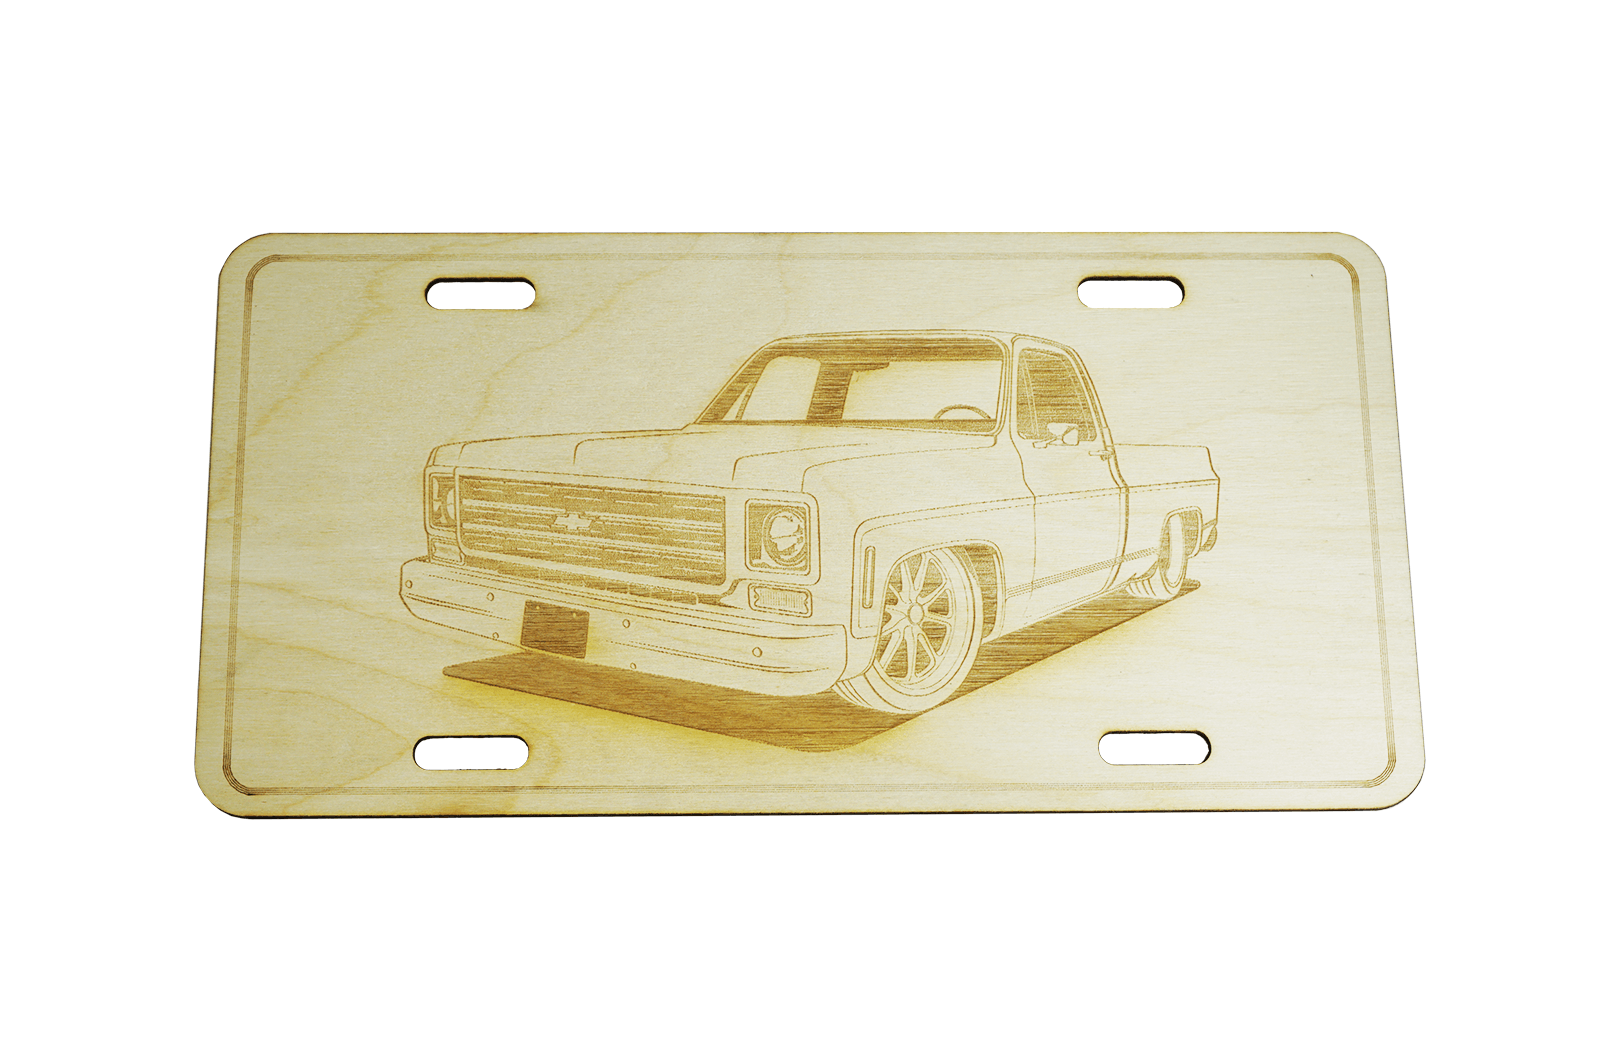 ZSPEC Chevy C10 Pickup Truck License Plate, Birch, Ornament for Office, Garage or Man-Cave